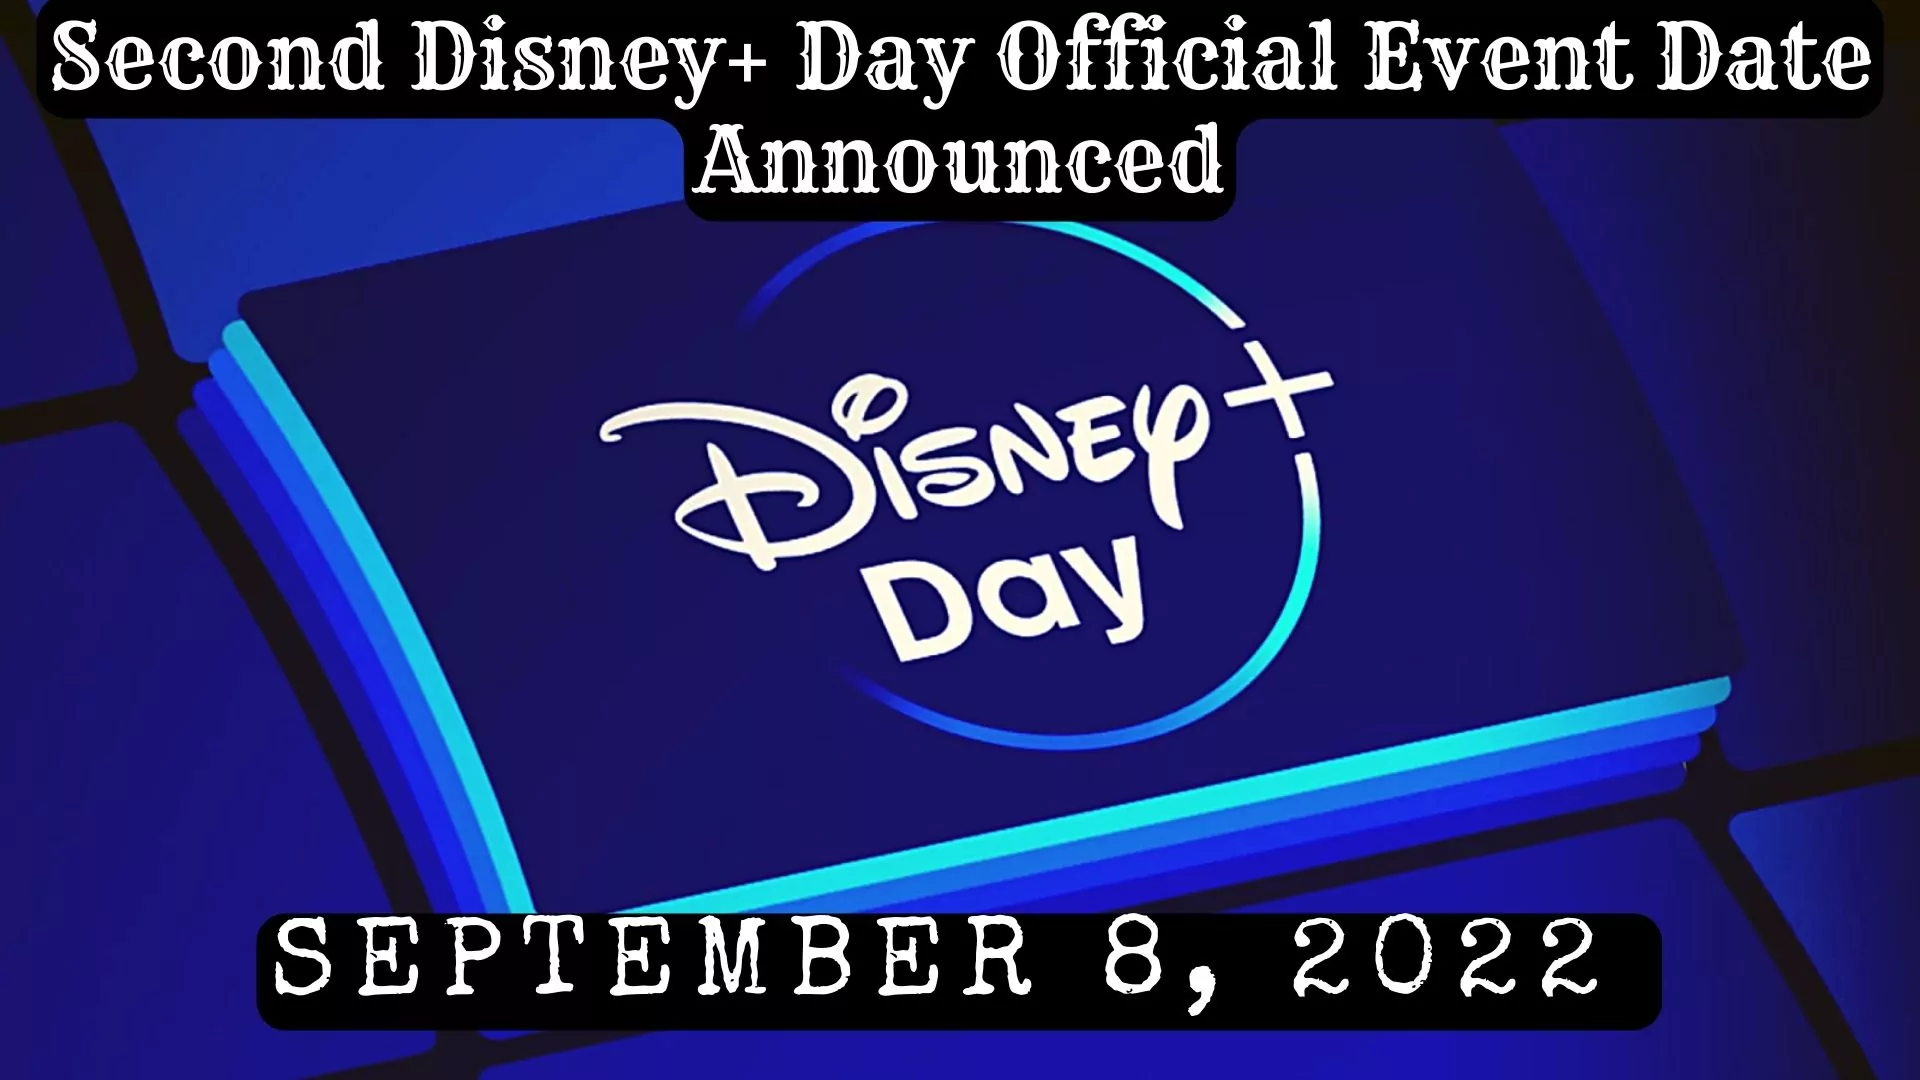 Second Disney+ Day Official Event Date Announced